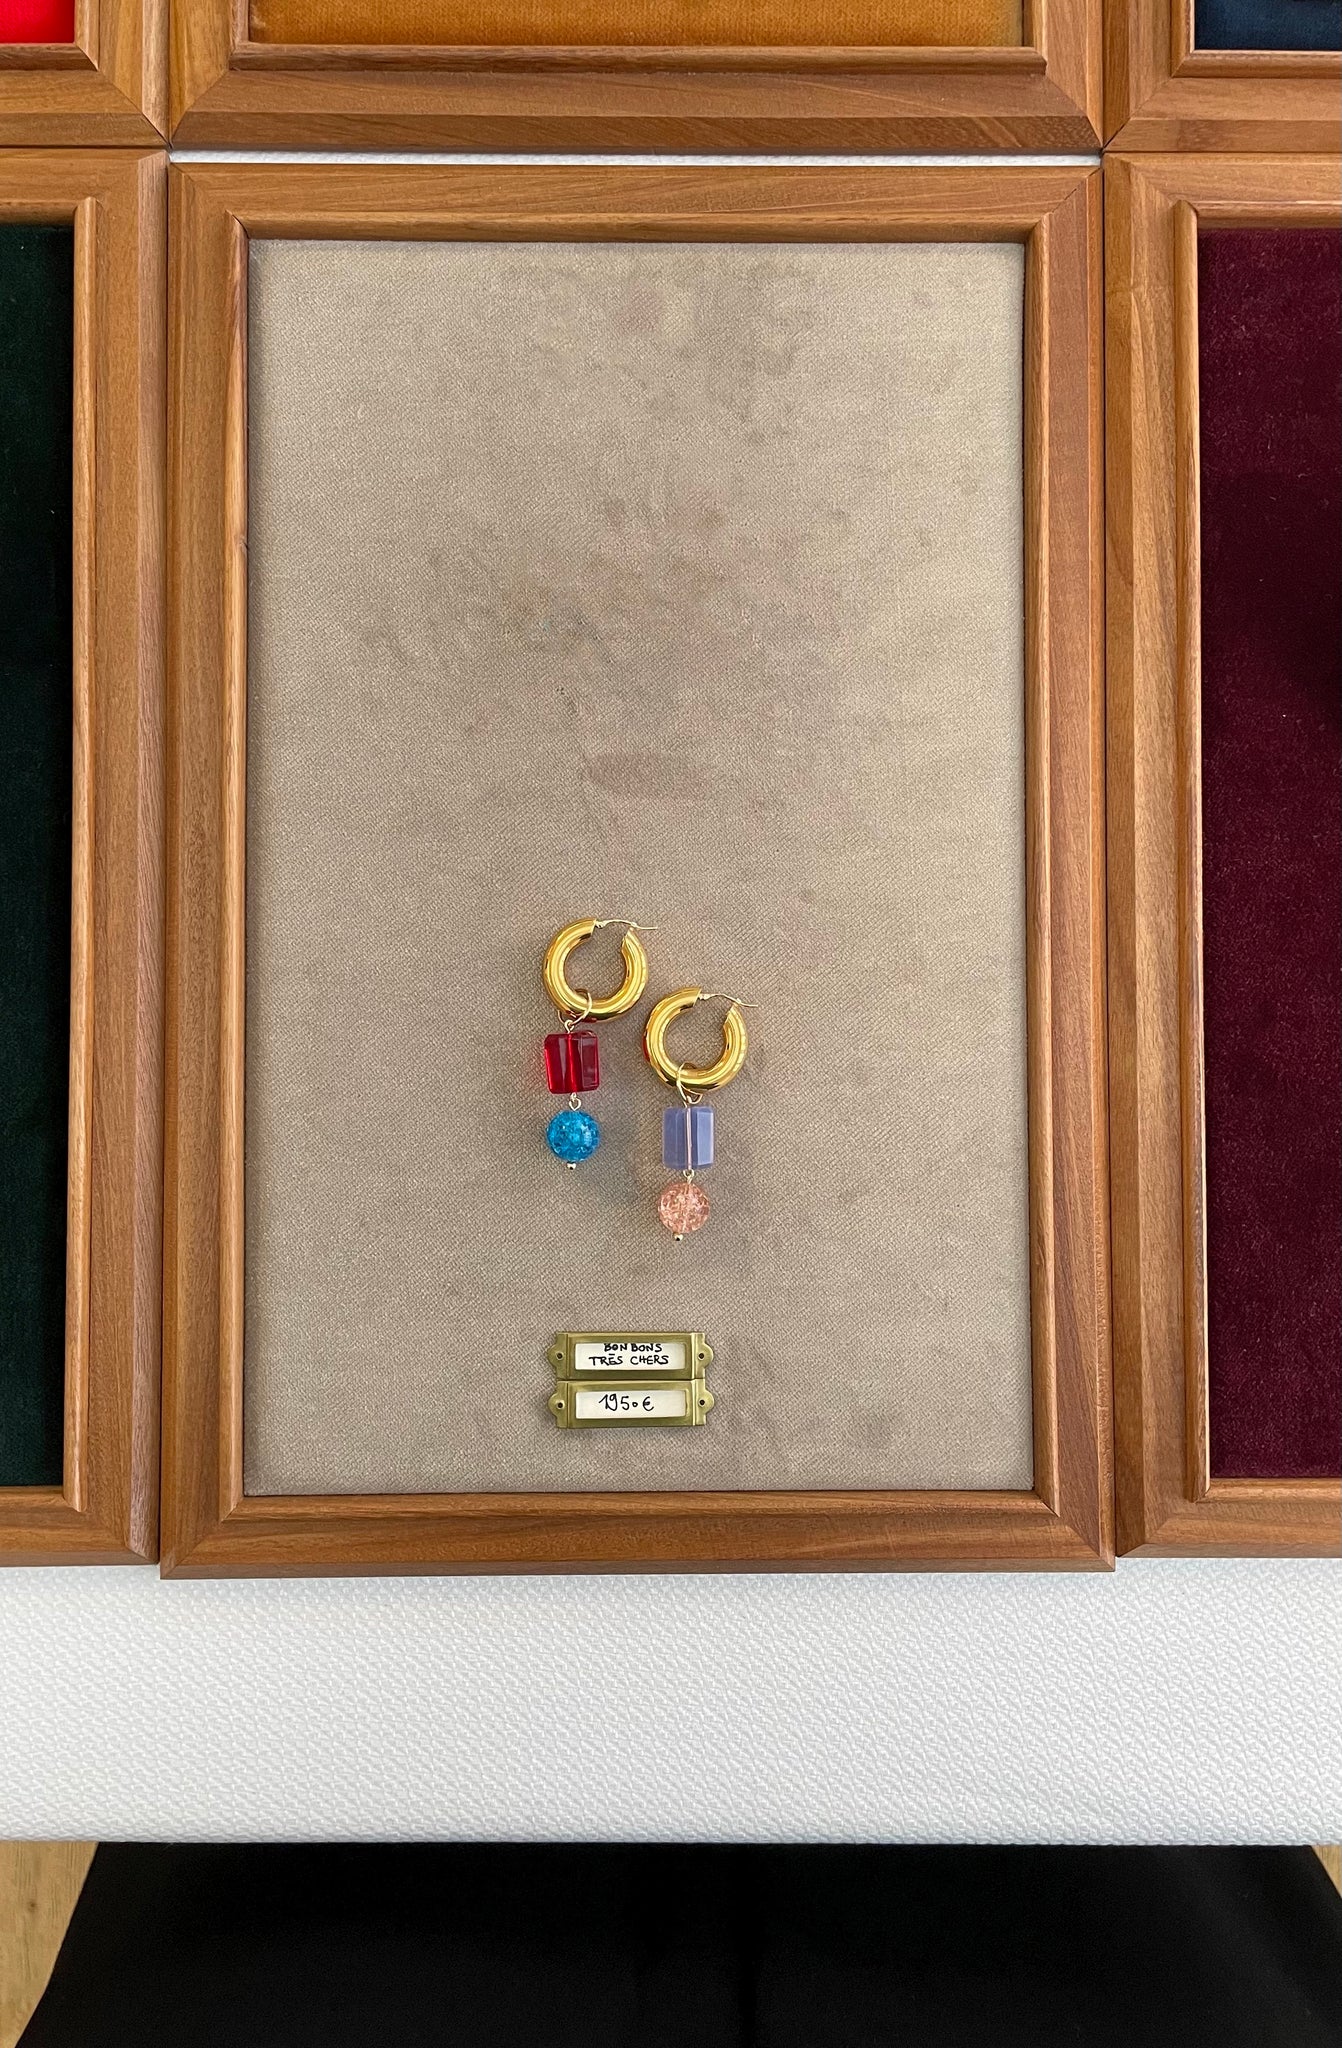 Expensive Candy earrings